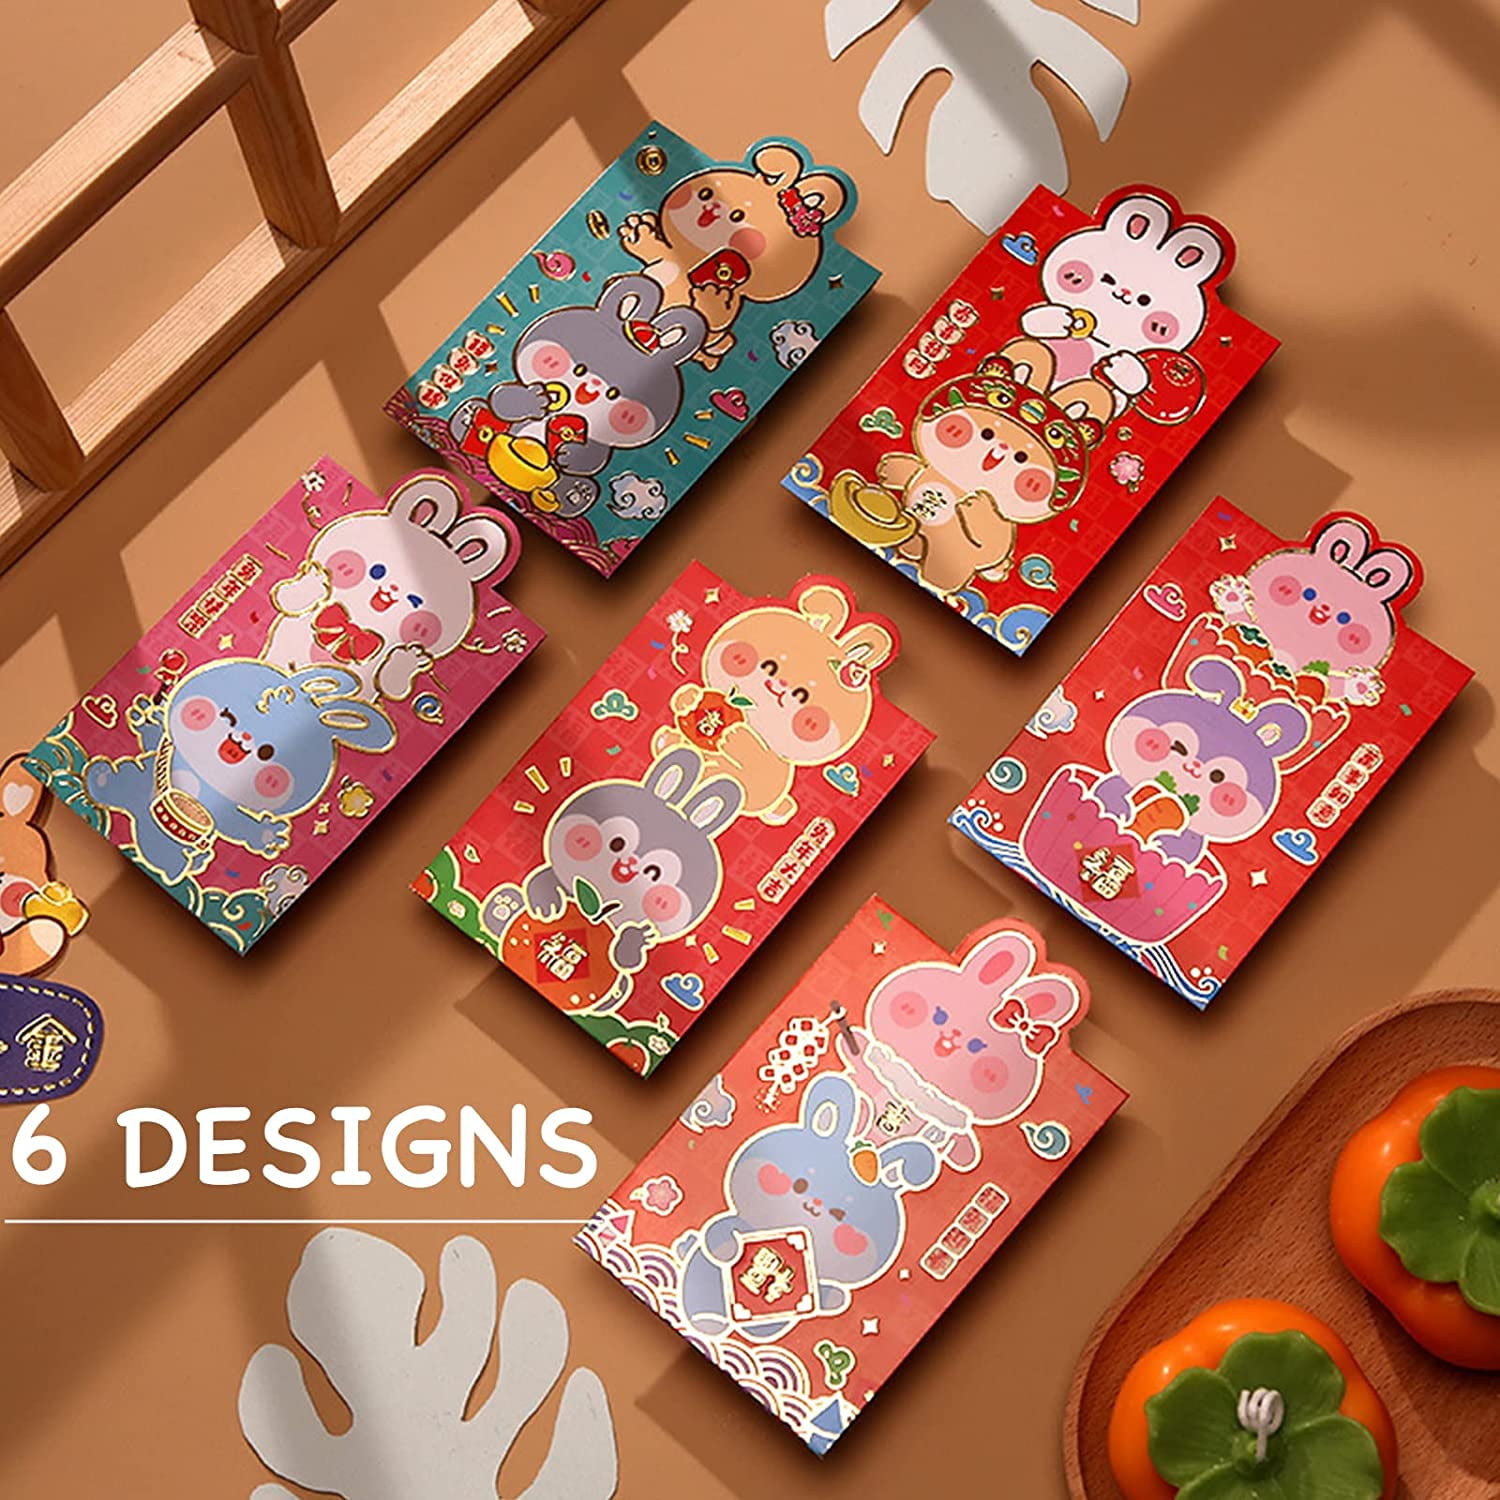  36PCS Chinese Red Envelopes 2023 Red Envelope Chinese with 6  Styles Rabbit Patterns, JMARFiYO Emboss Foil Spring Festival Lucky Money Red  Pockets, 3.5x6.6 In Chinese New Year Lunar Rabbit Hongbao 